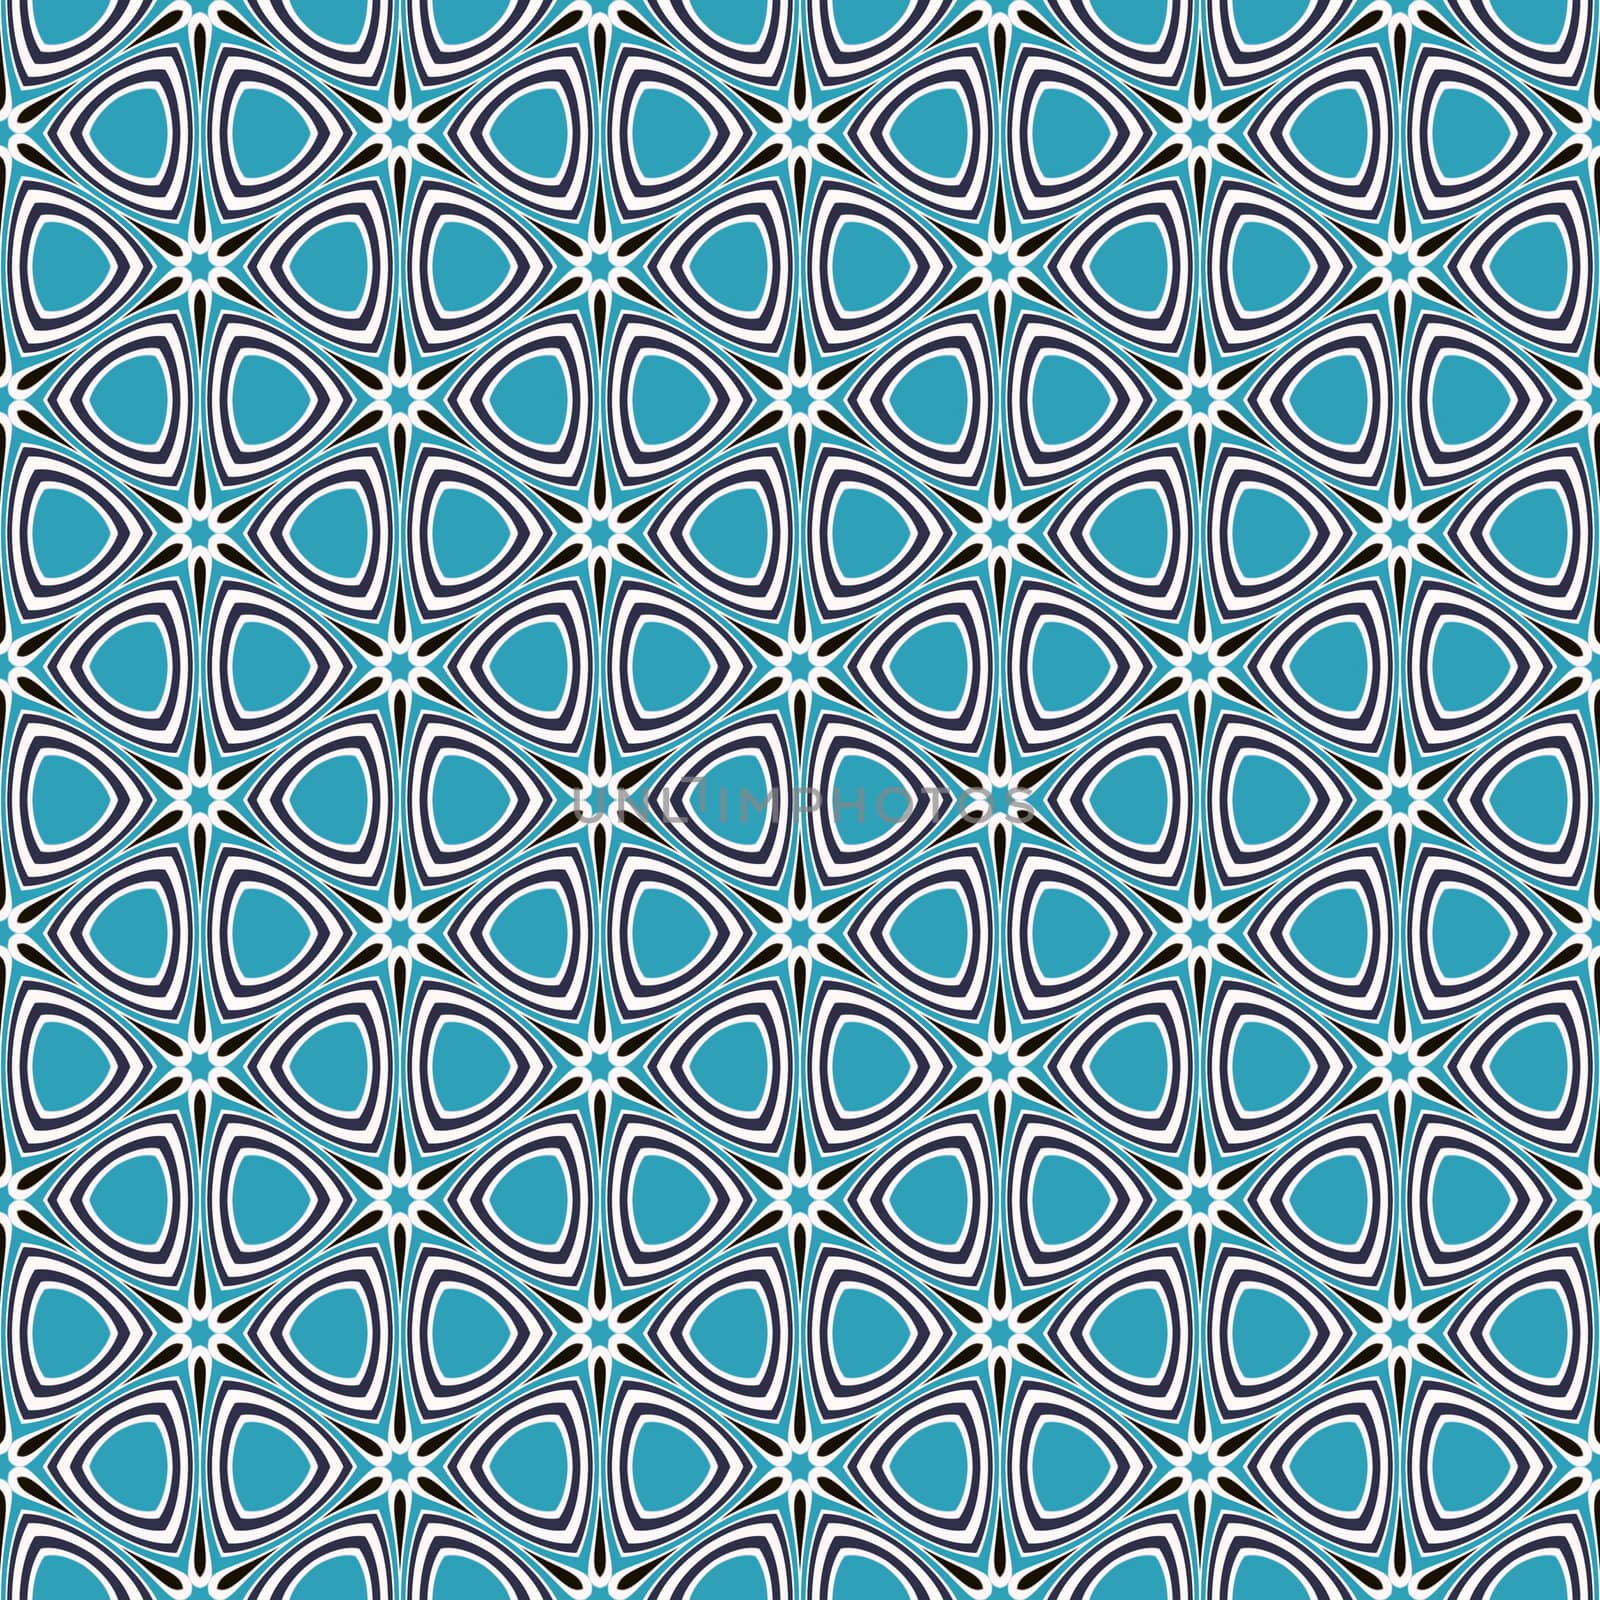 seamless texture of blue, black and white star shapes in retro style